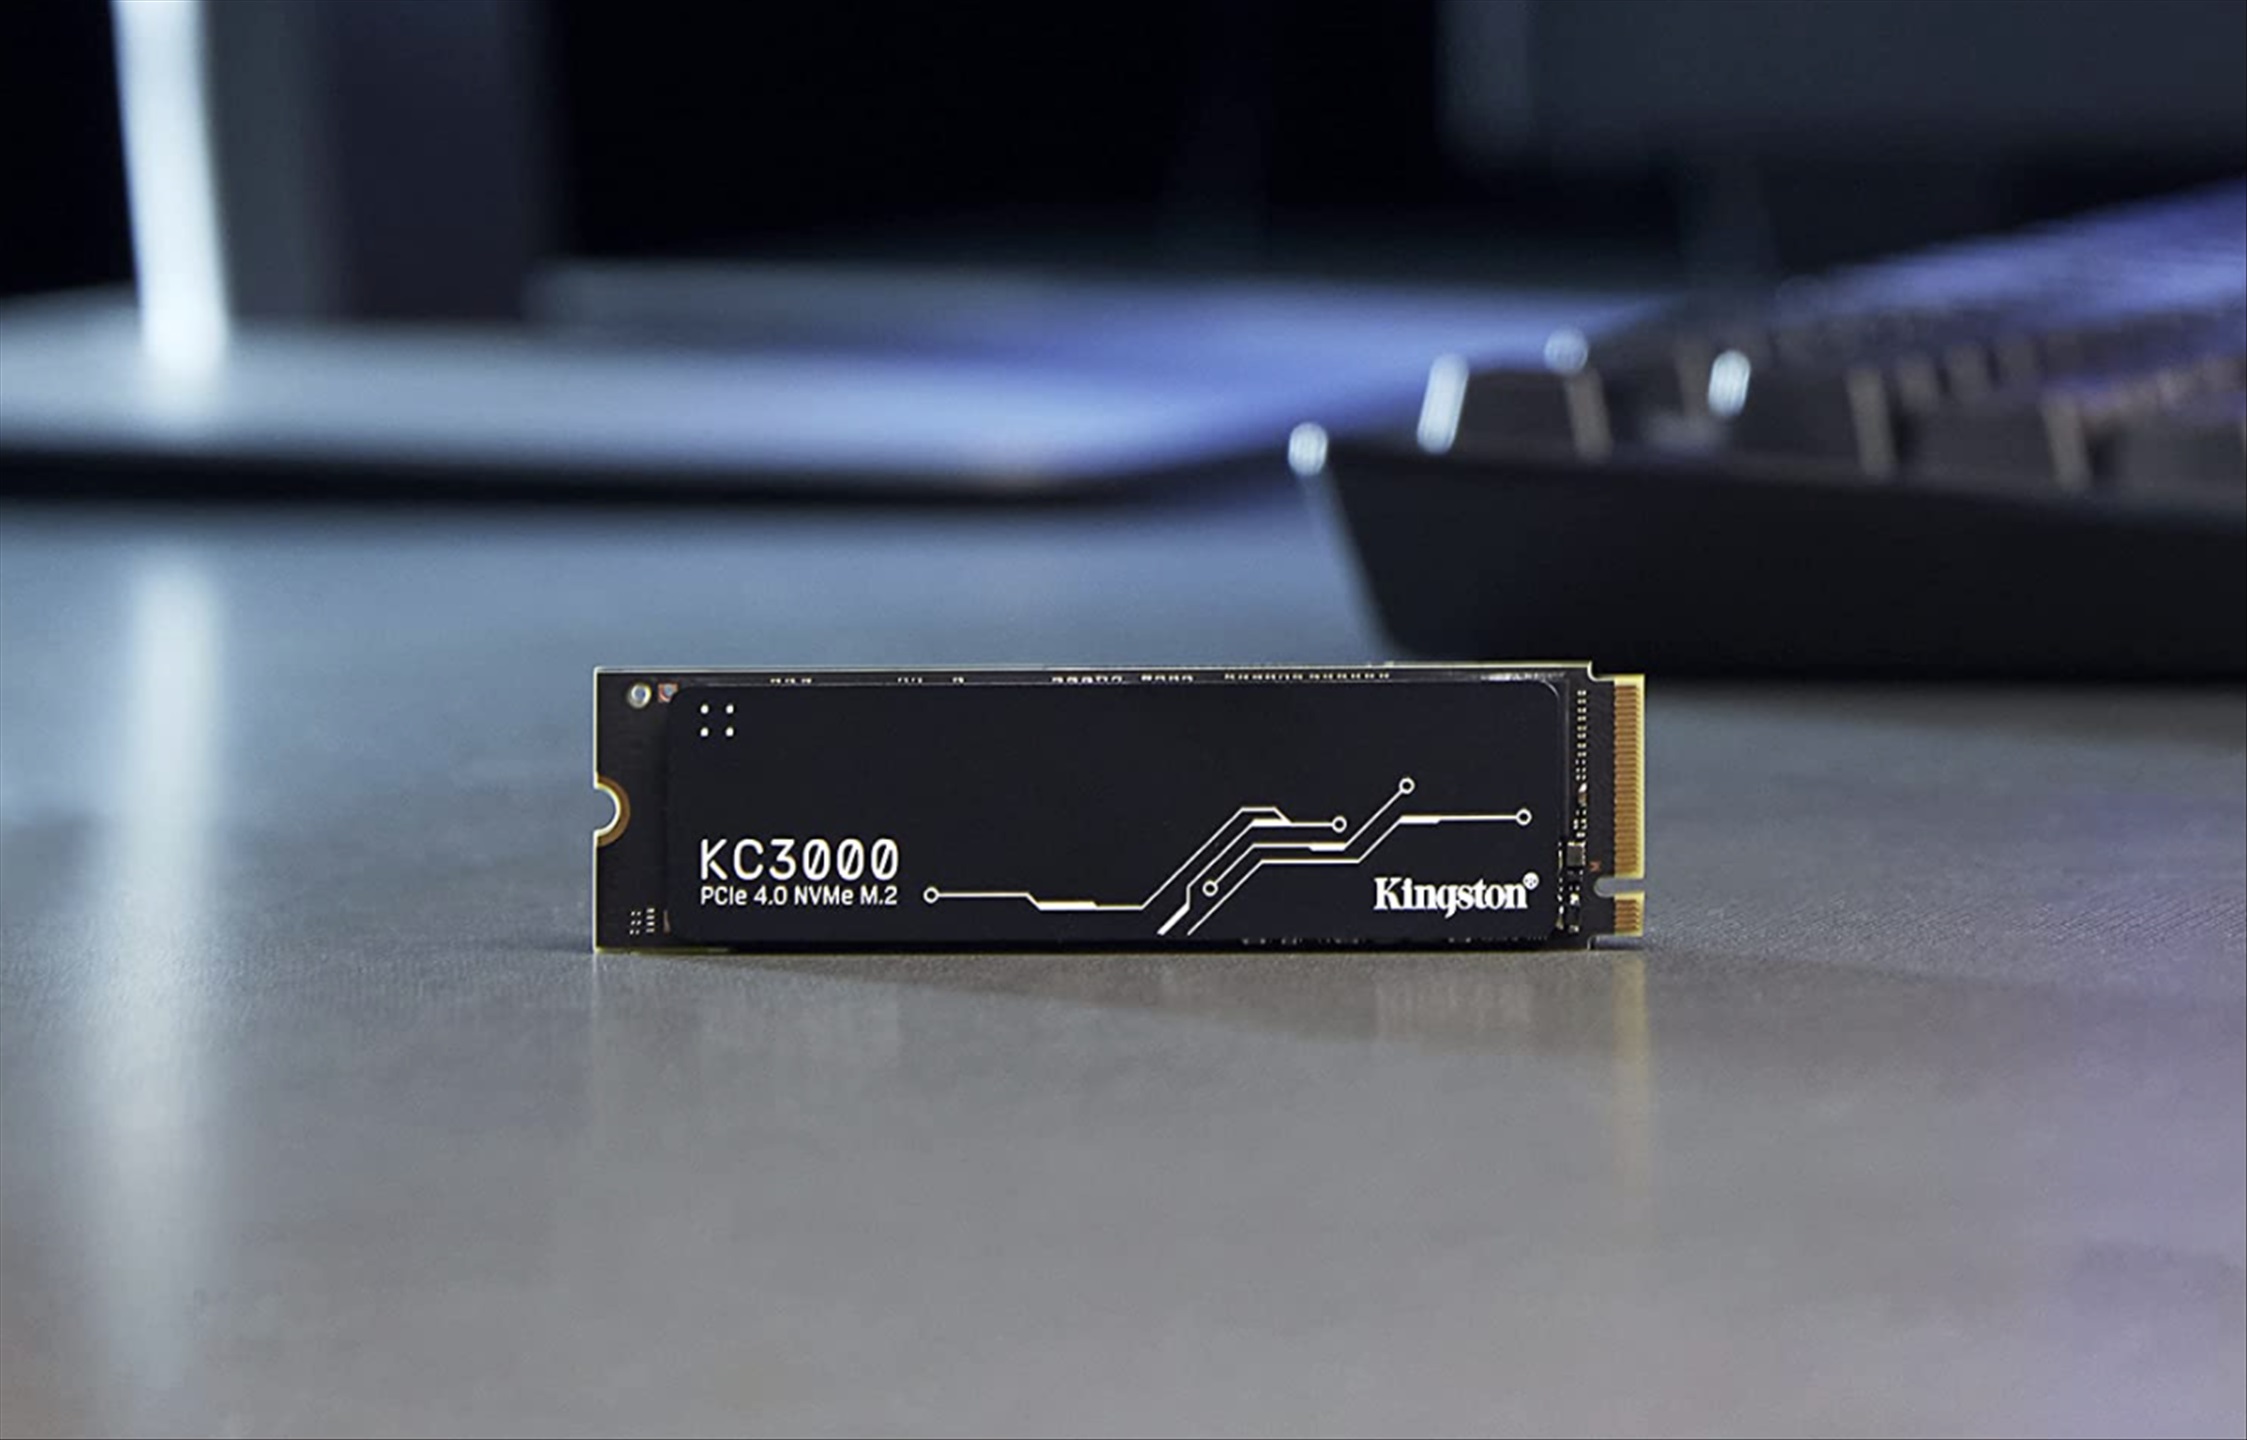 7,000MB/s transfer speed in compact form – Kingston KC3000 NVMe SSD Review